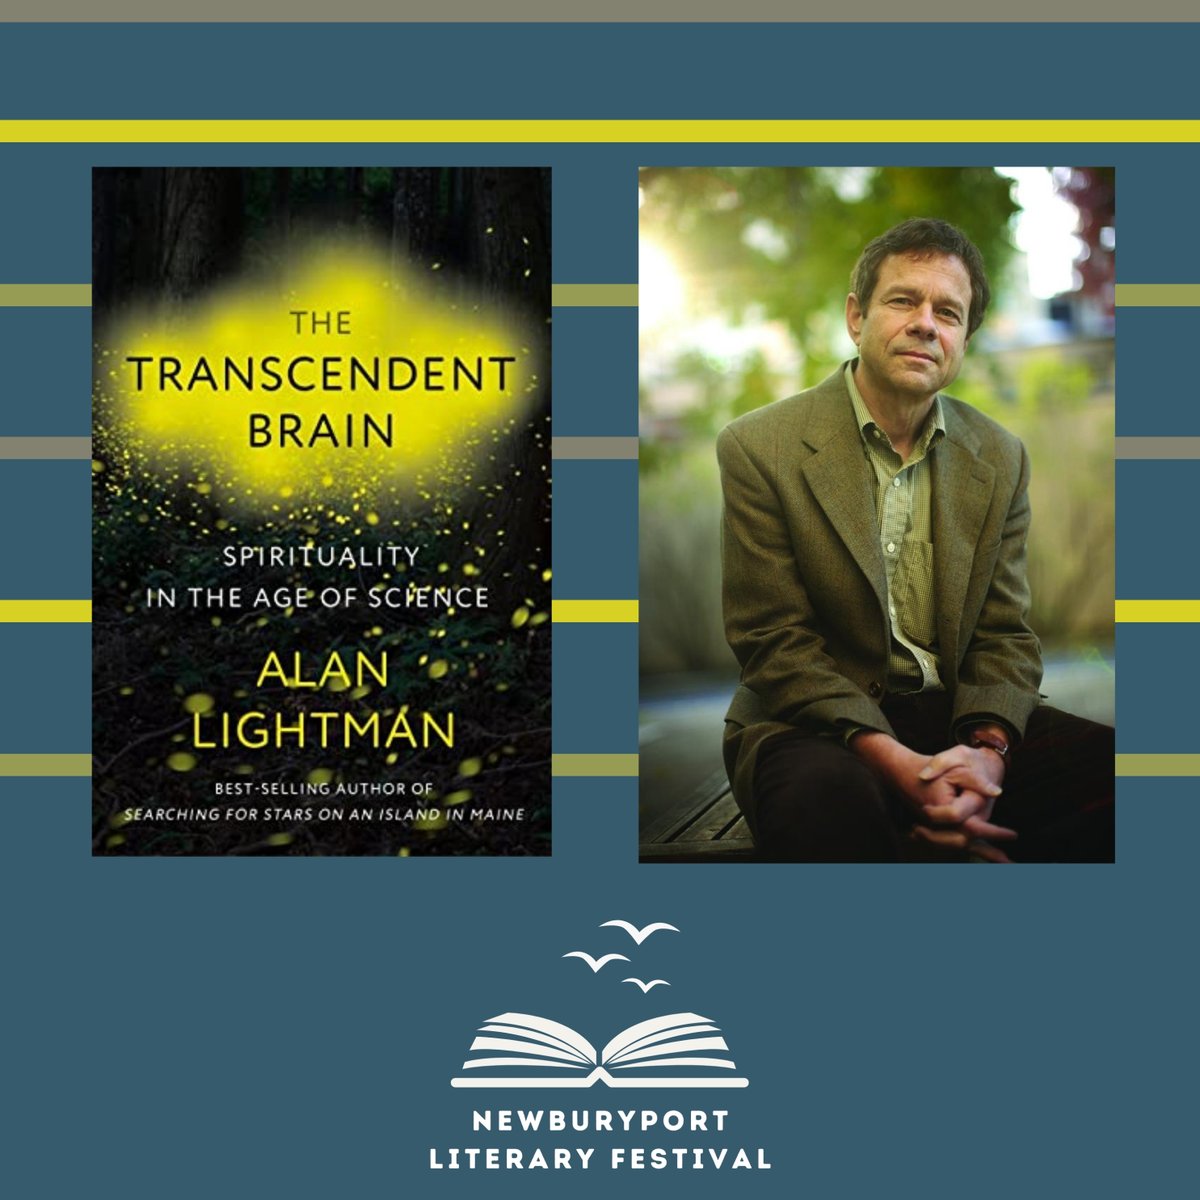 Don't miss Alan Lightman in conversation with Susan Keatley, this Saturday at 2:30PM at the Firehouse Center for the Arts in Newburyport!